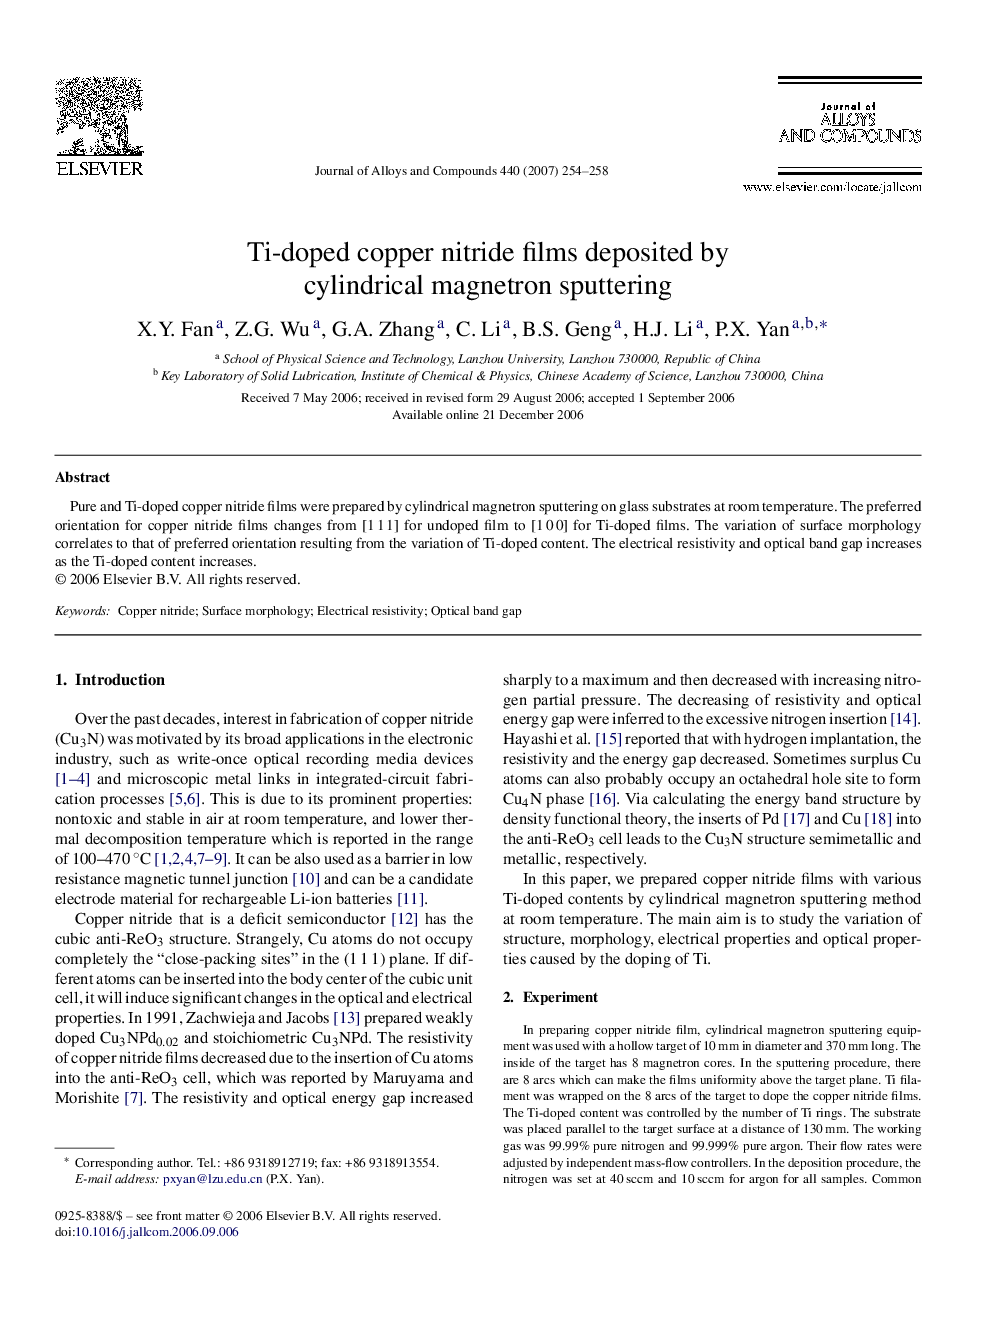 Ti-doped copper nitride films deposited by cylindrical magnetron sputtering